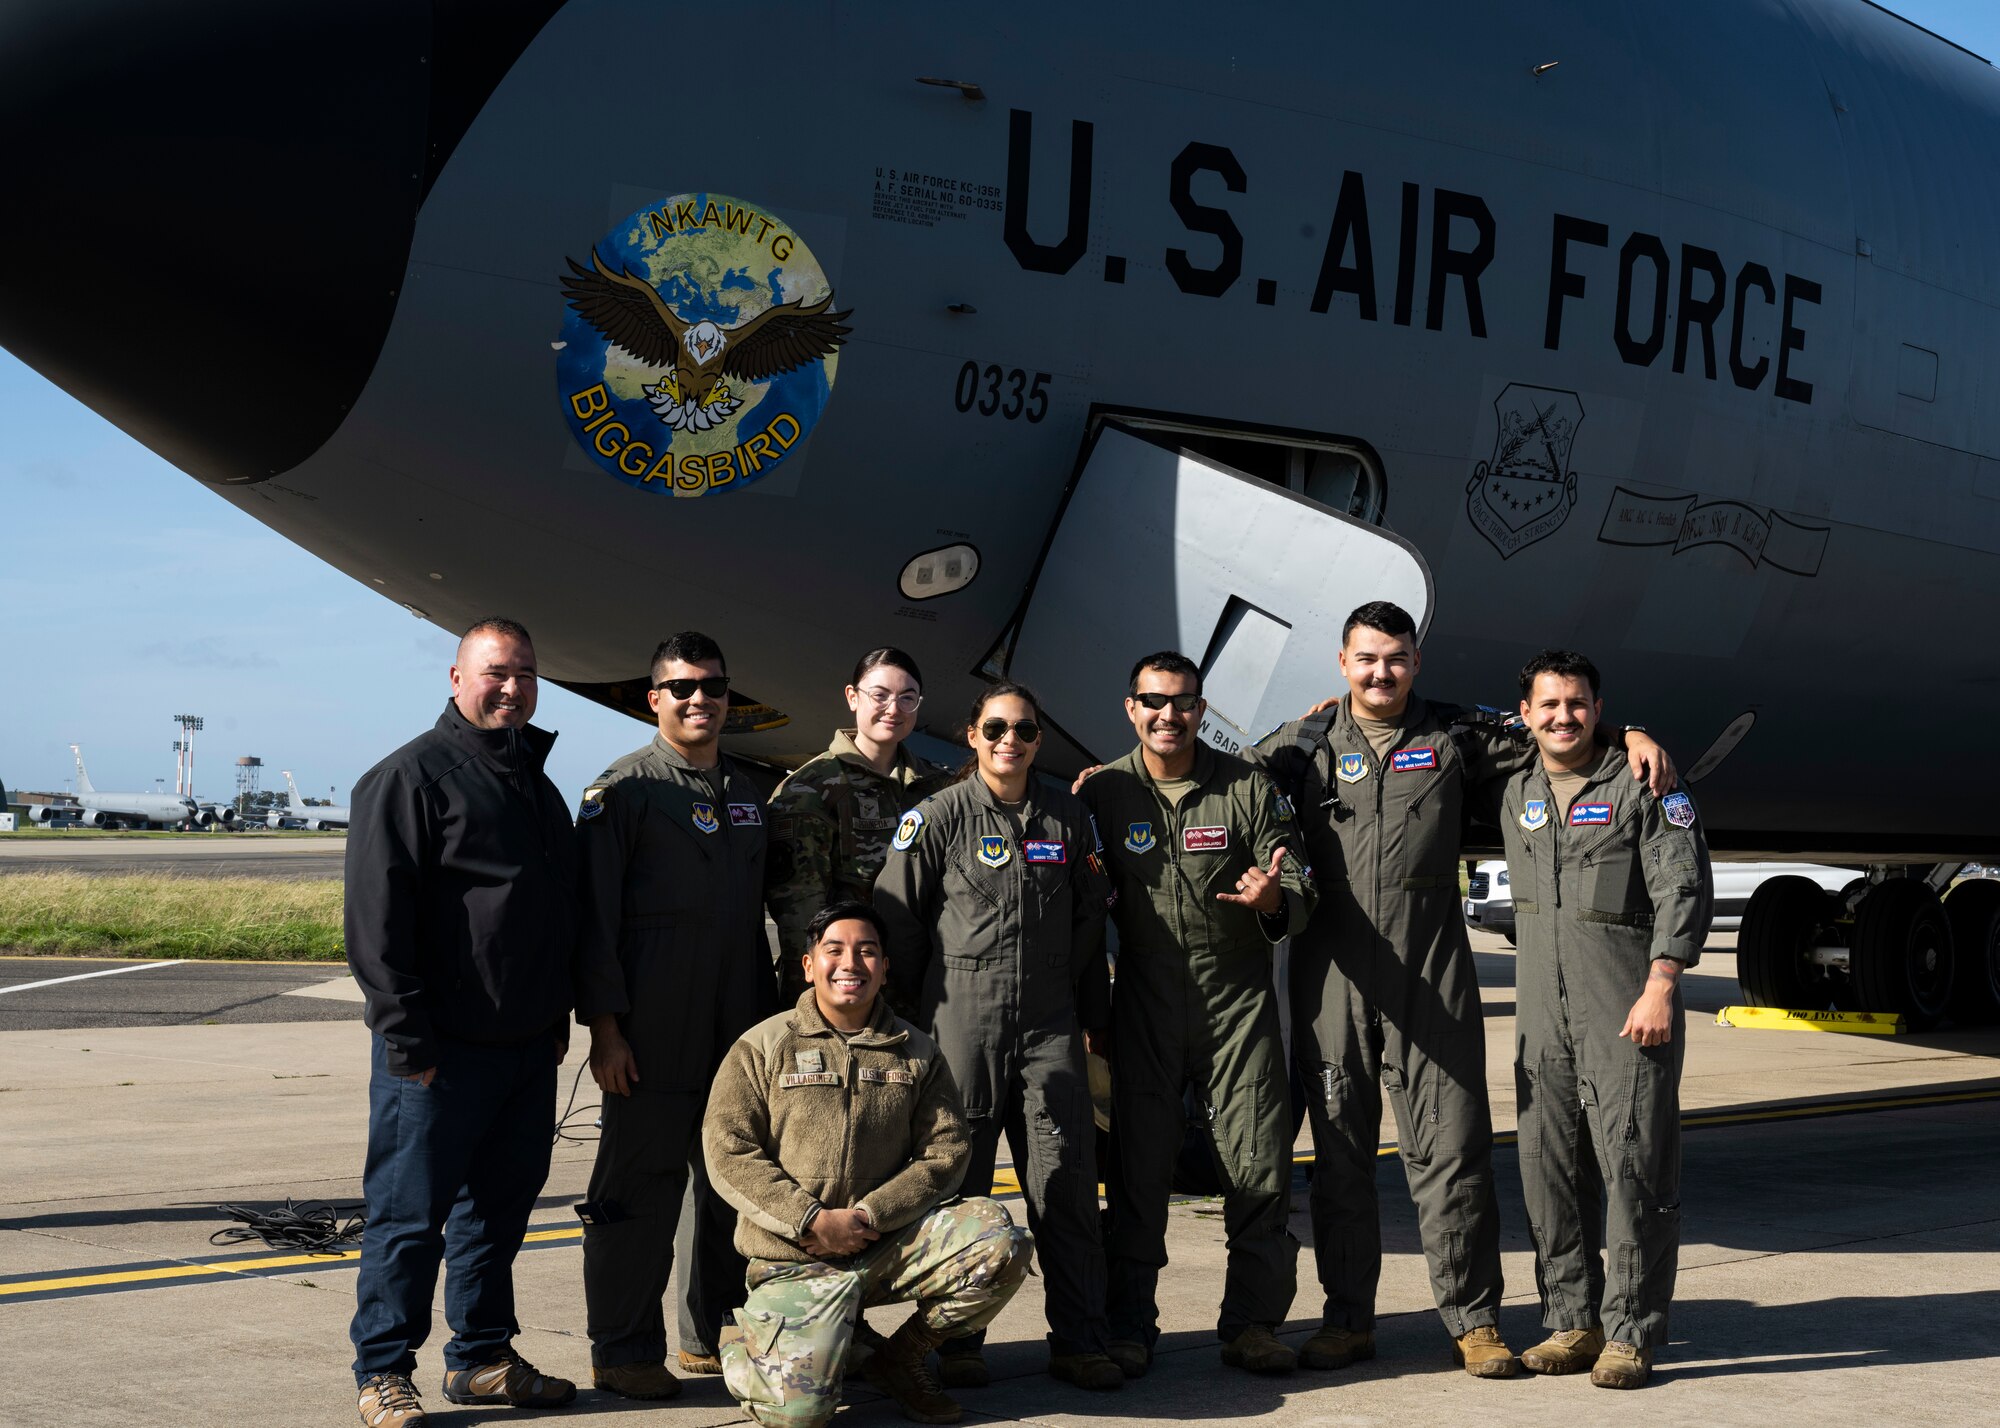 Hispanic Airmen from various squadrons came together in honor of Hispanic Heritage Month and shared cultural experiences with each other.